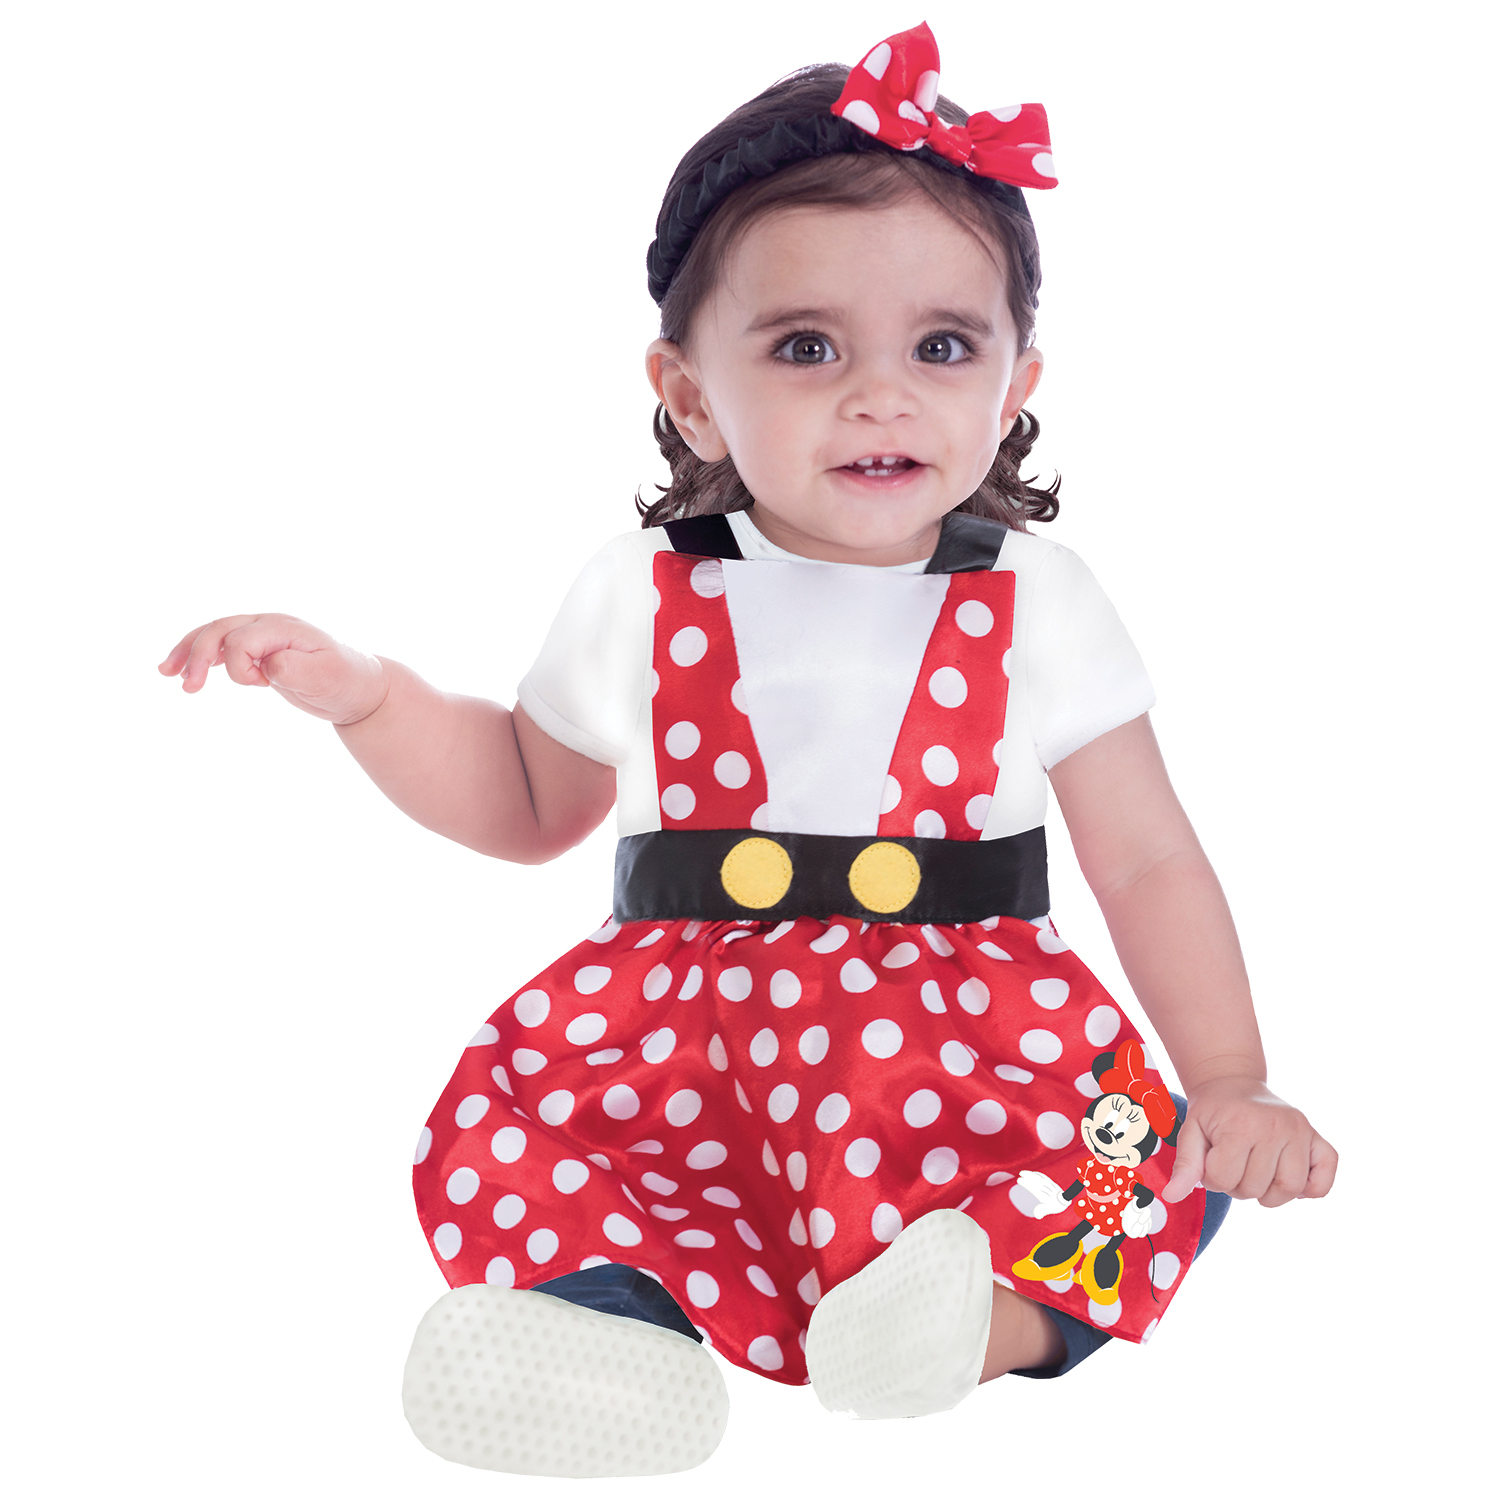 Disney Baby Minnie Mouse Dress Up Pinafore 3-12Months (64-80cm) RRP £14.99 CLEARANCE XL £2